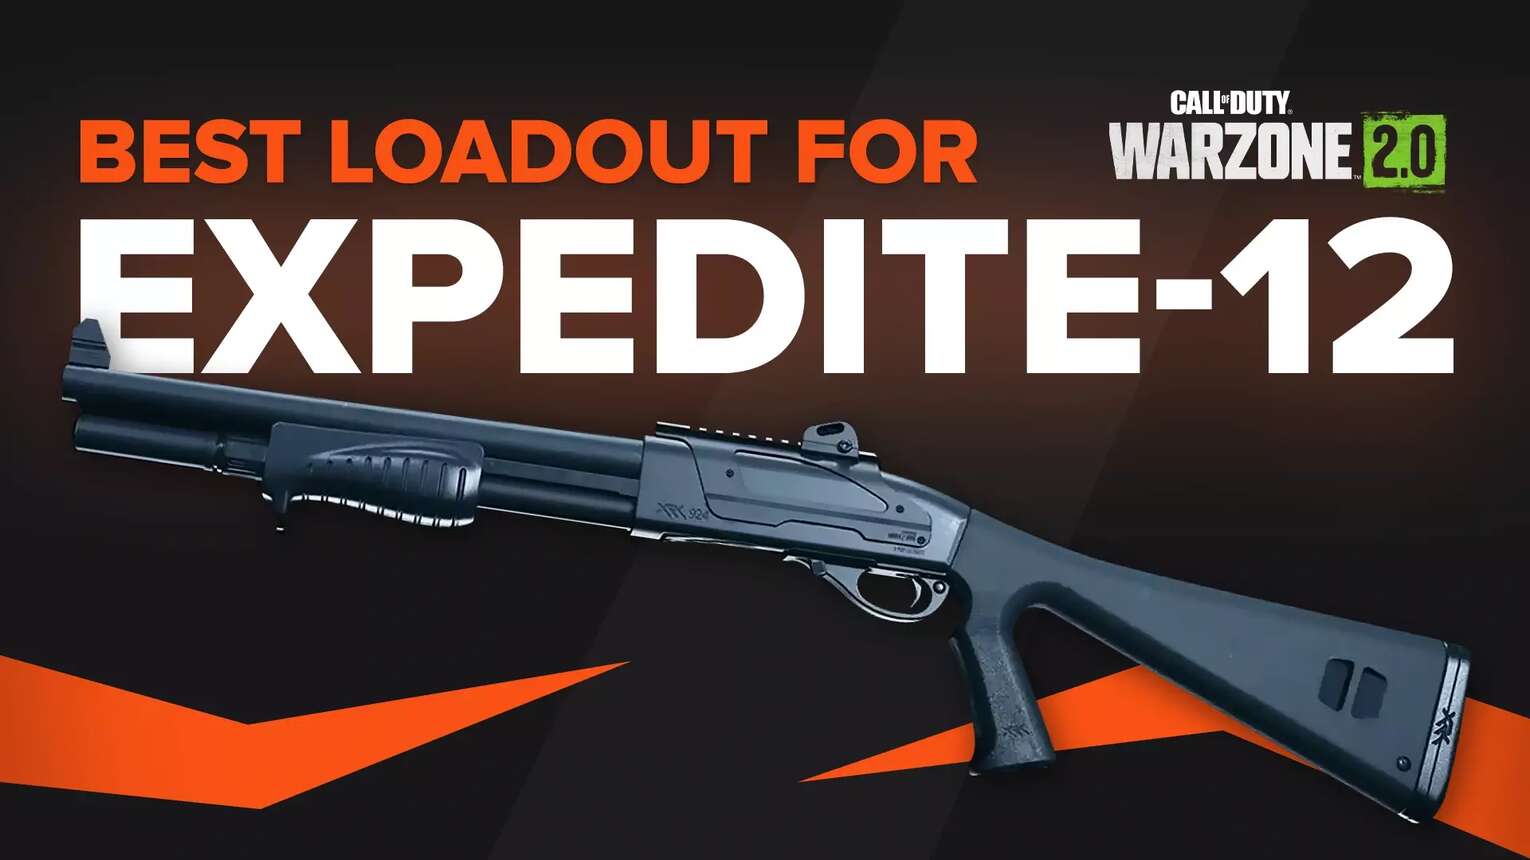 3 Best Expedite 12 Loadouts in Warzone 2.0